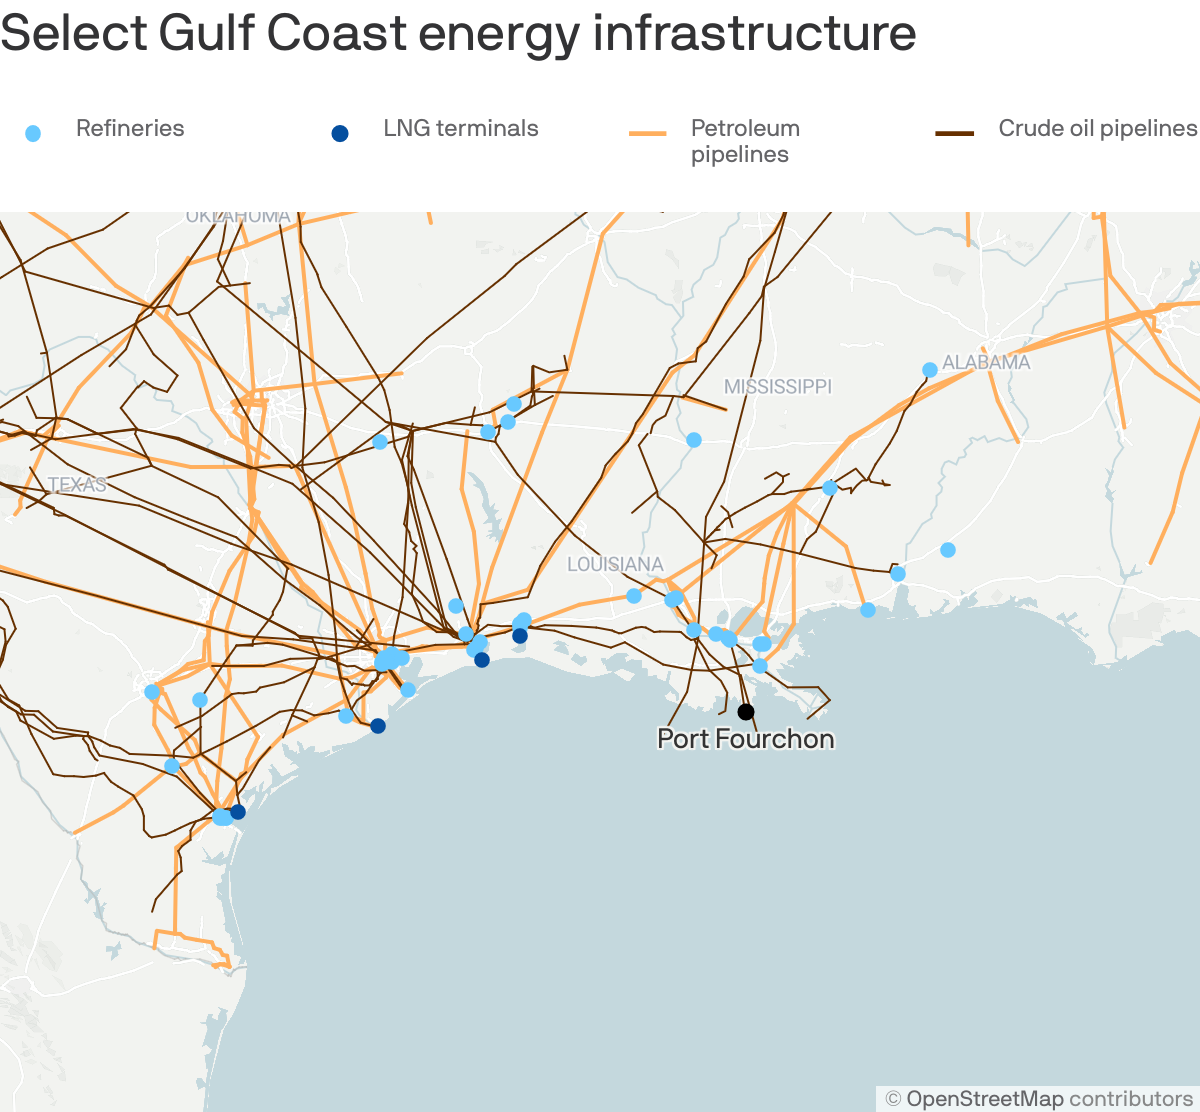 Select Gulf Coast energy infrastructure